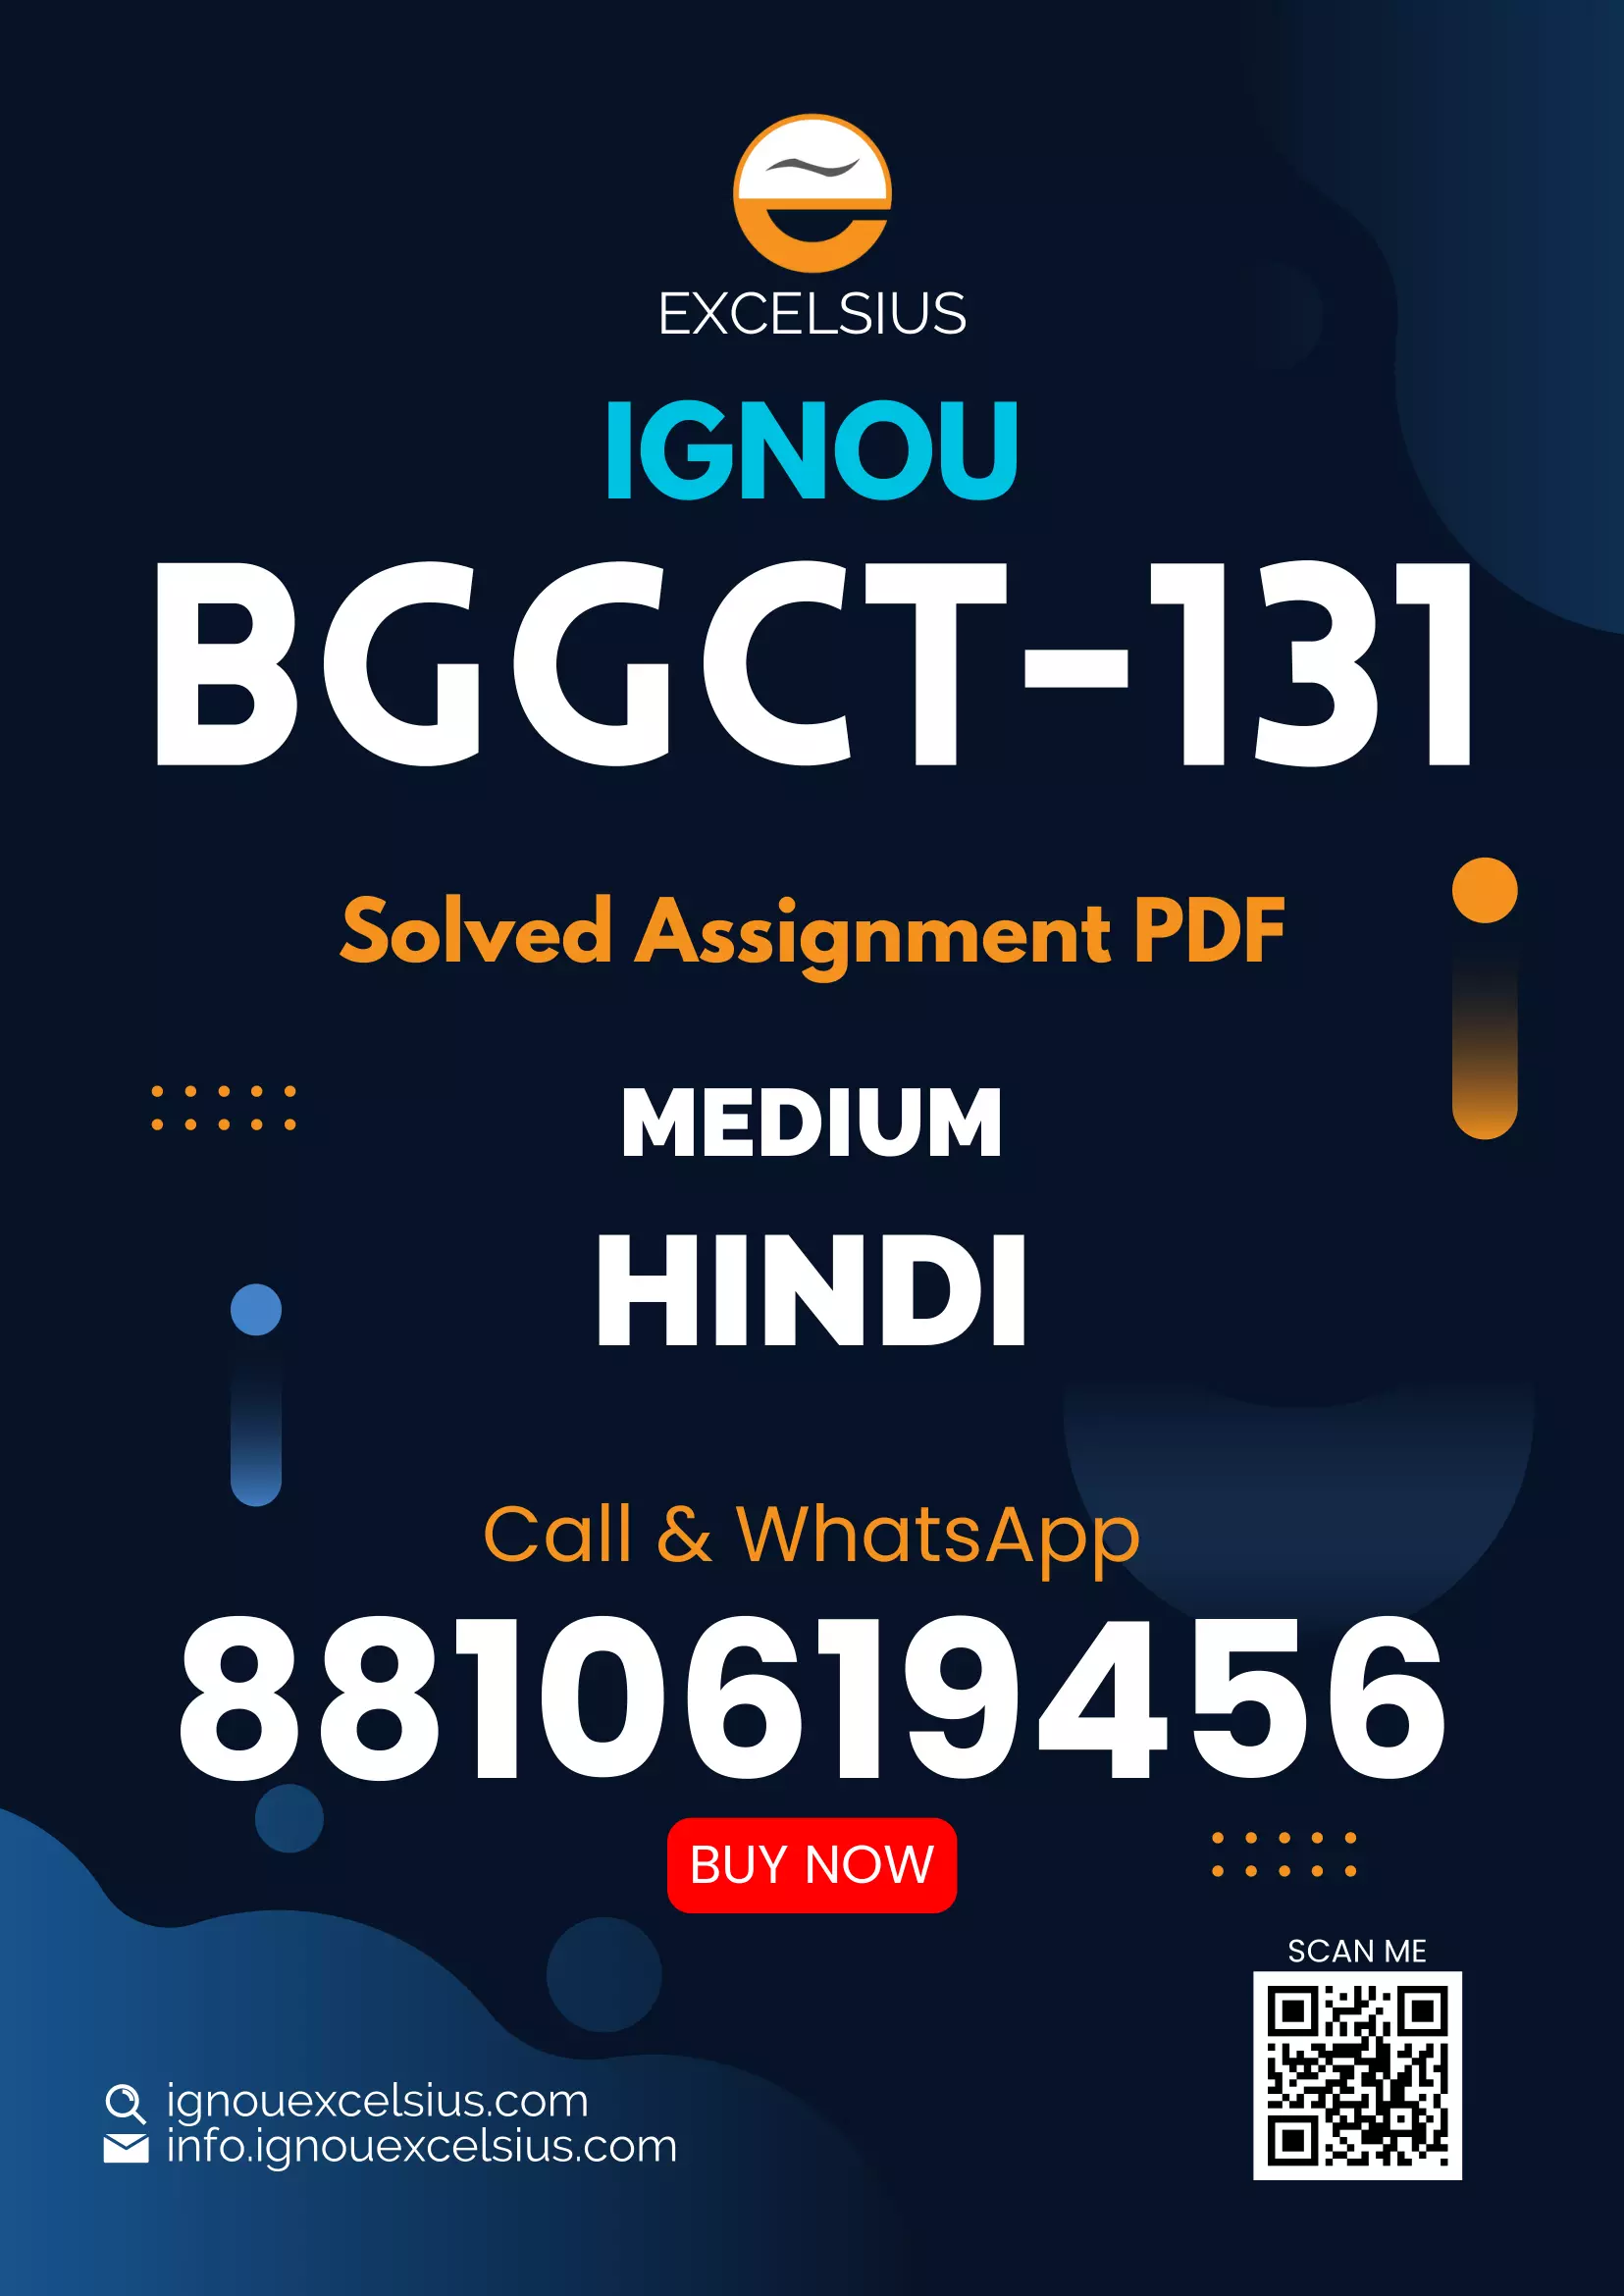 IGNOU BGGCT-131 - Physical Geography, Latest Solved Assignment-January 2023 - December 2023